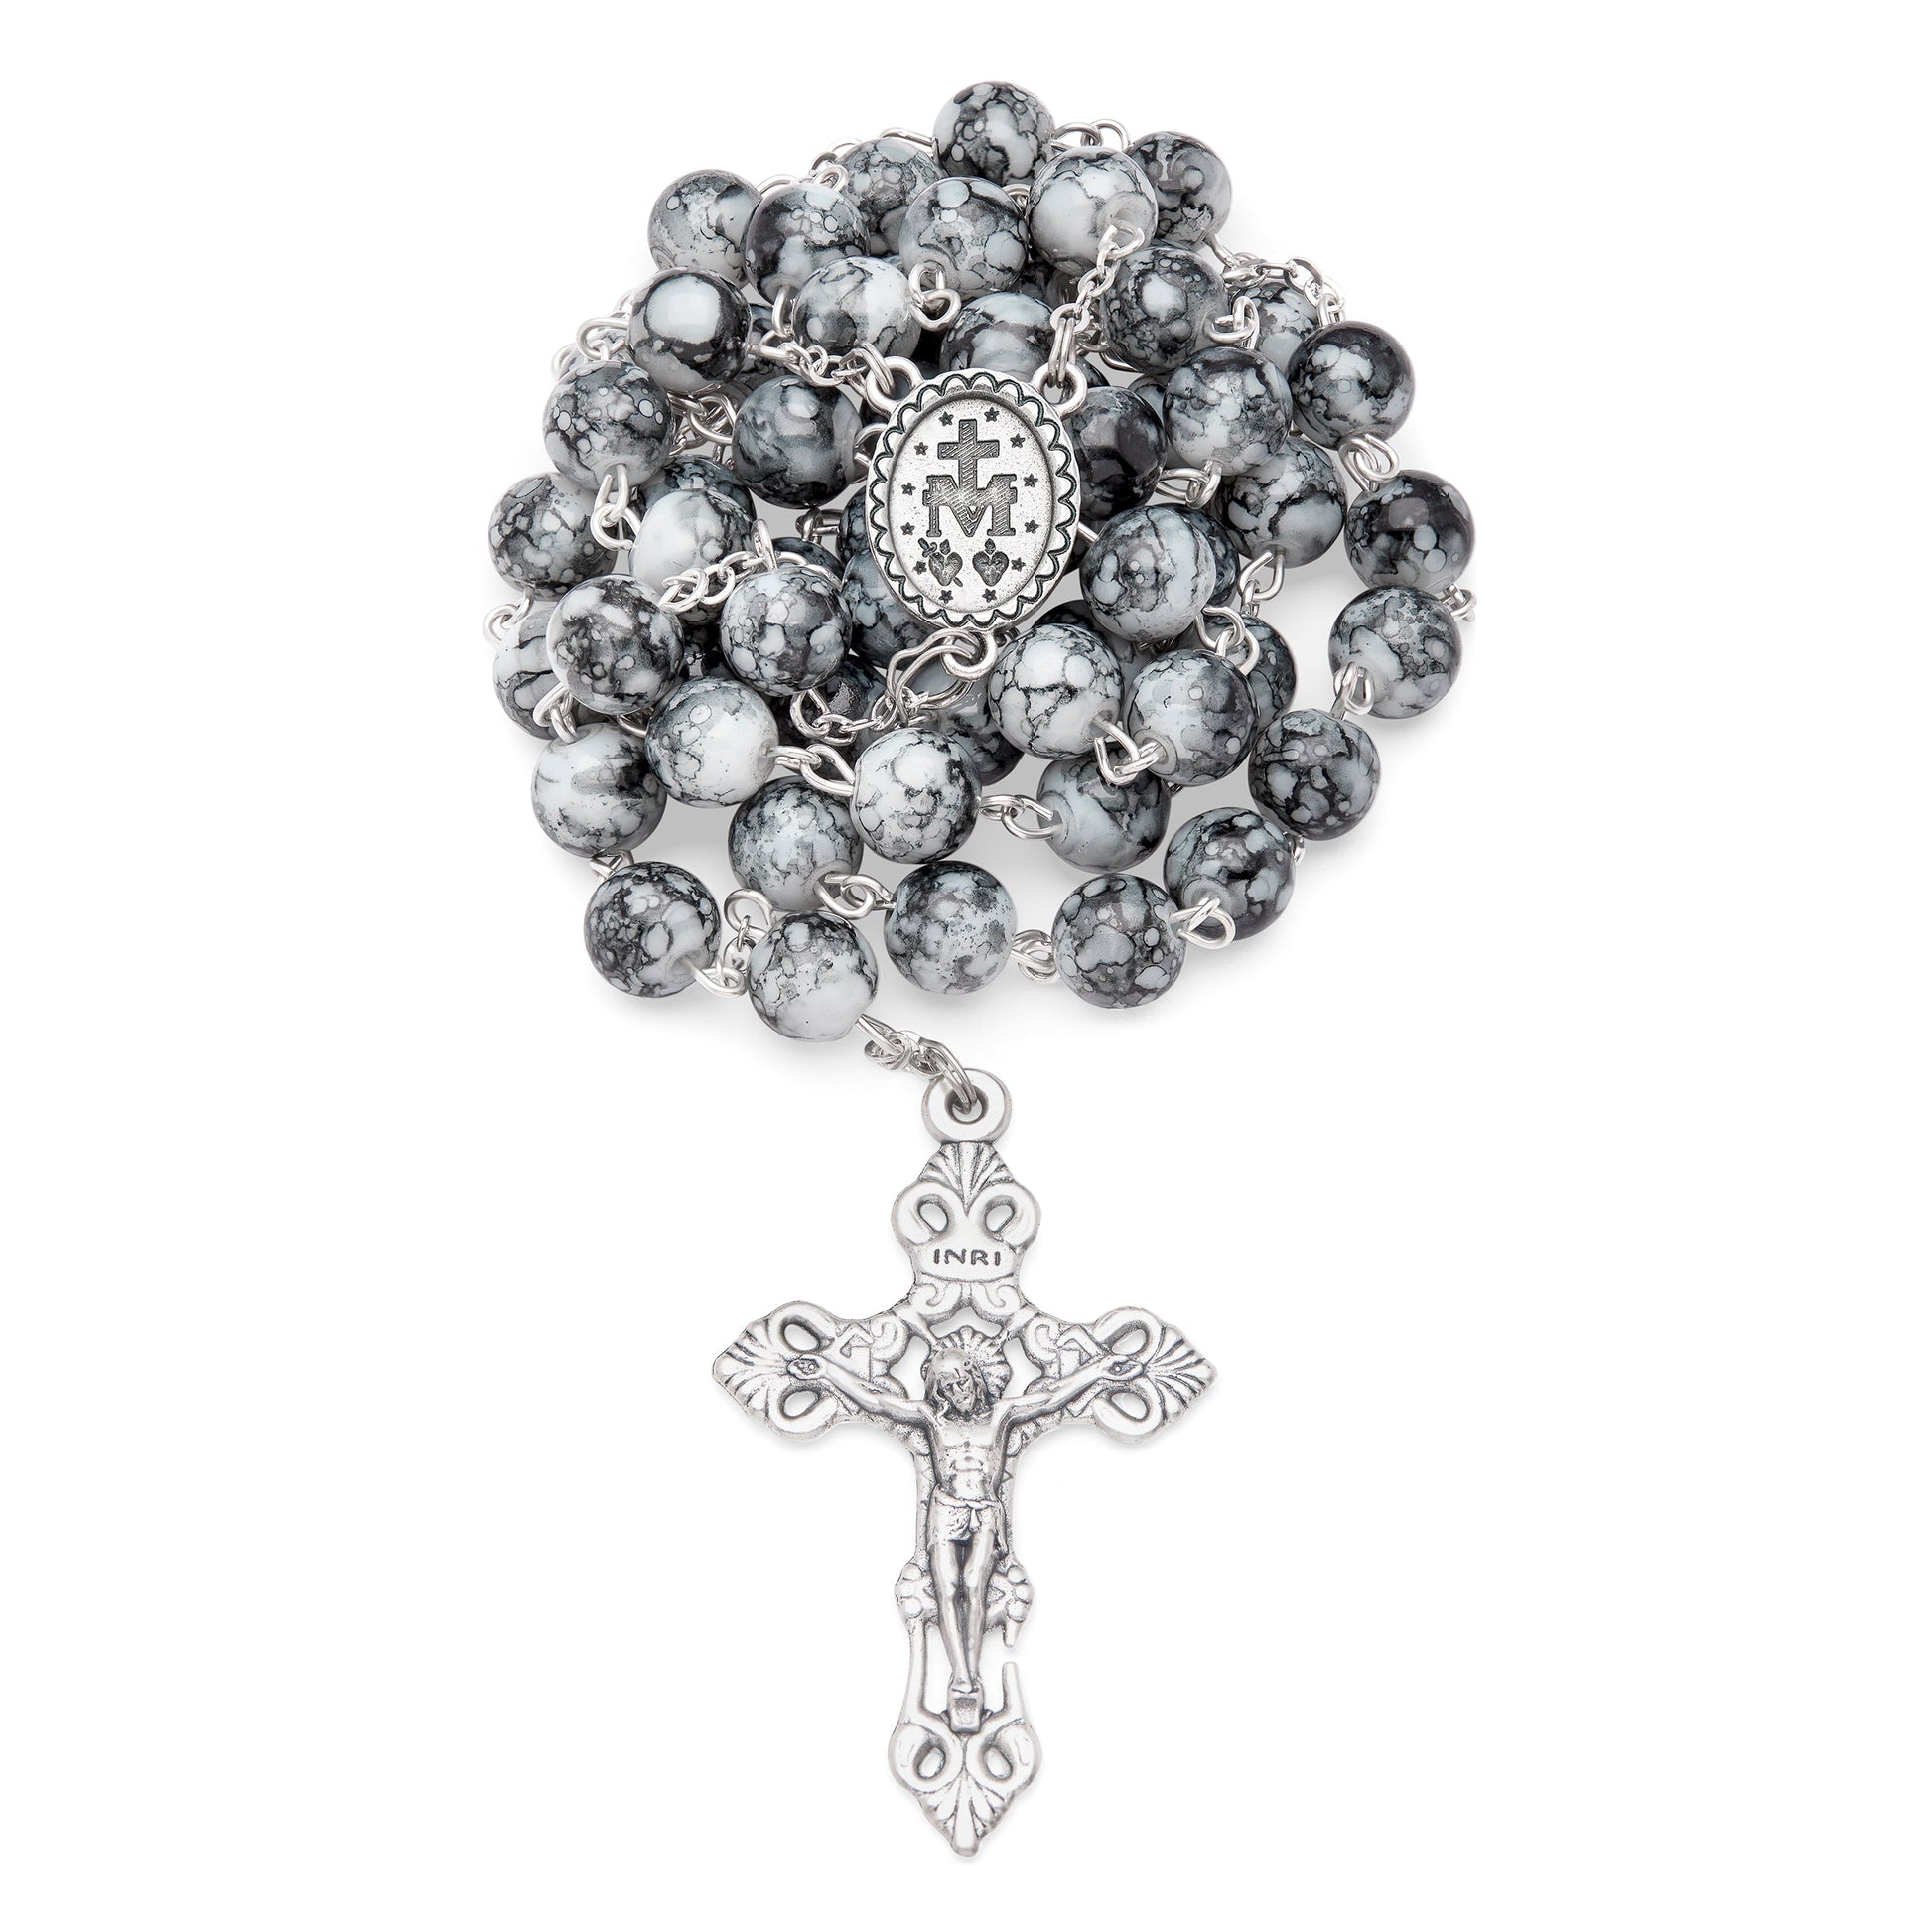 MONDO CATTOLICO Prayer Beads 55 cm (21.65 in) / 8 mm (0.3 in) Black Marble Glass Rosary and Case